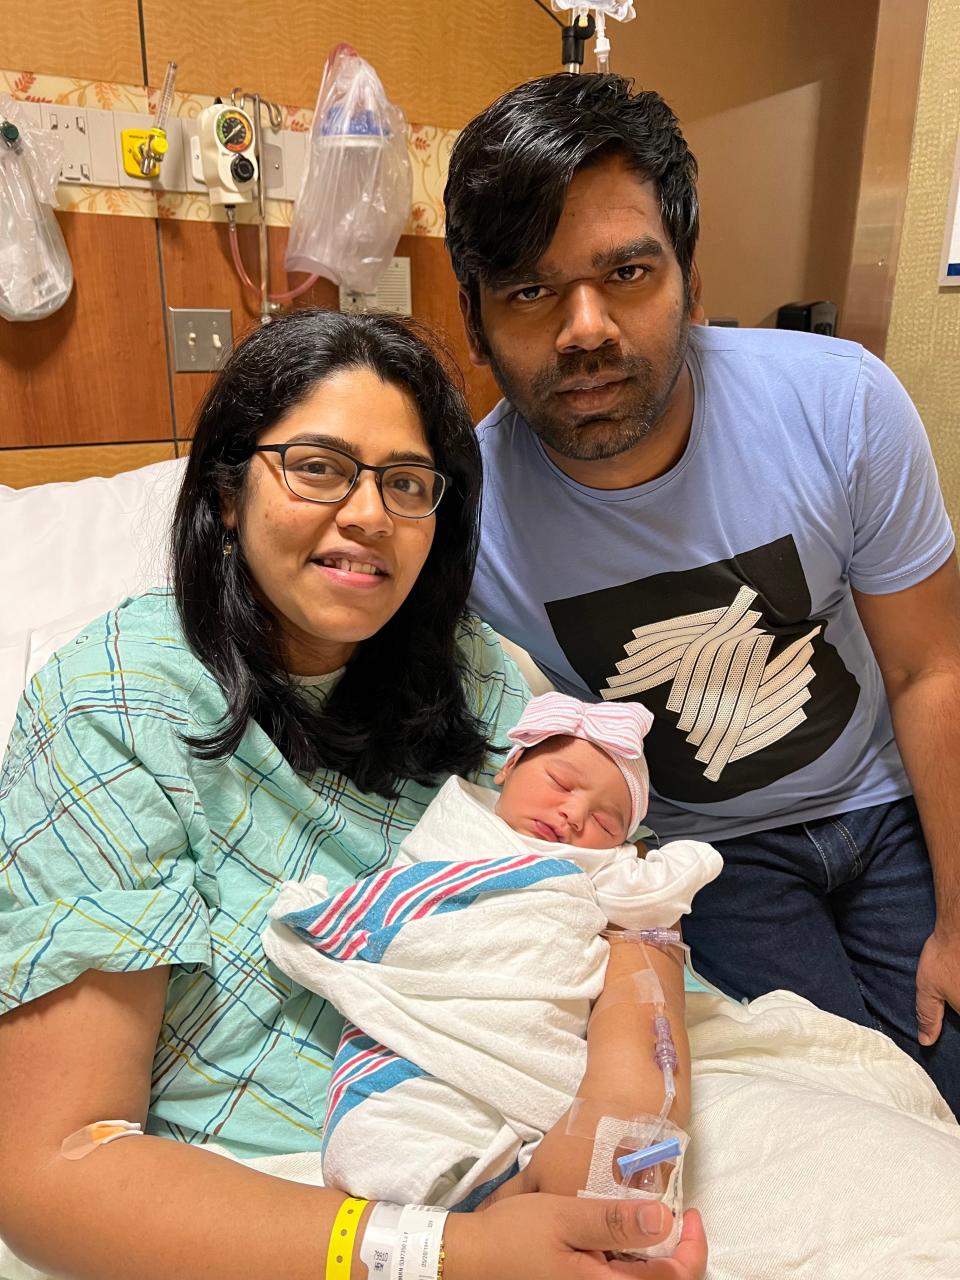 The daughter of Nikhila Yerroju and Anandharaj Rajamanickam of Monroe, Nihira Anandharaj was the first to lay claim to 2023 in Central Jersey. At 12:41 a.m., Nihira made her grand entrance weighing in at 8 pounds 4 ounces and 20.5 inches long at Saint Peter's University Hospital in New Brunswick.